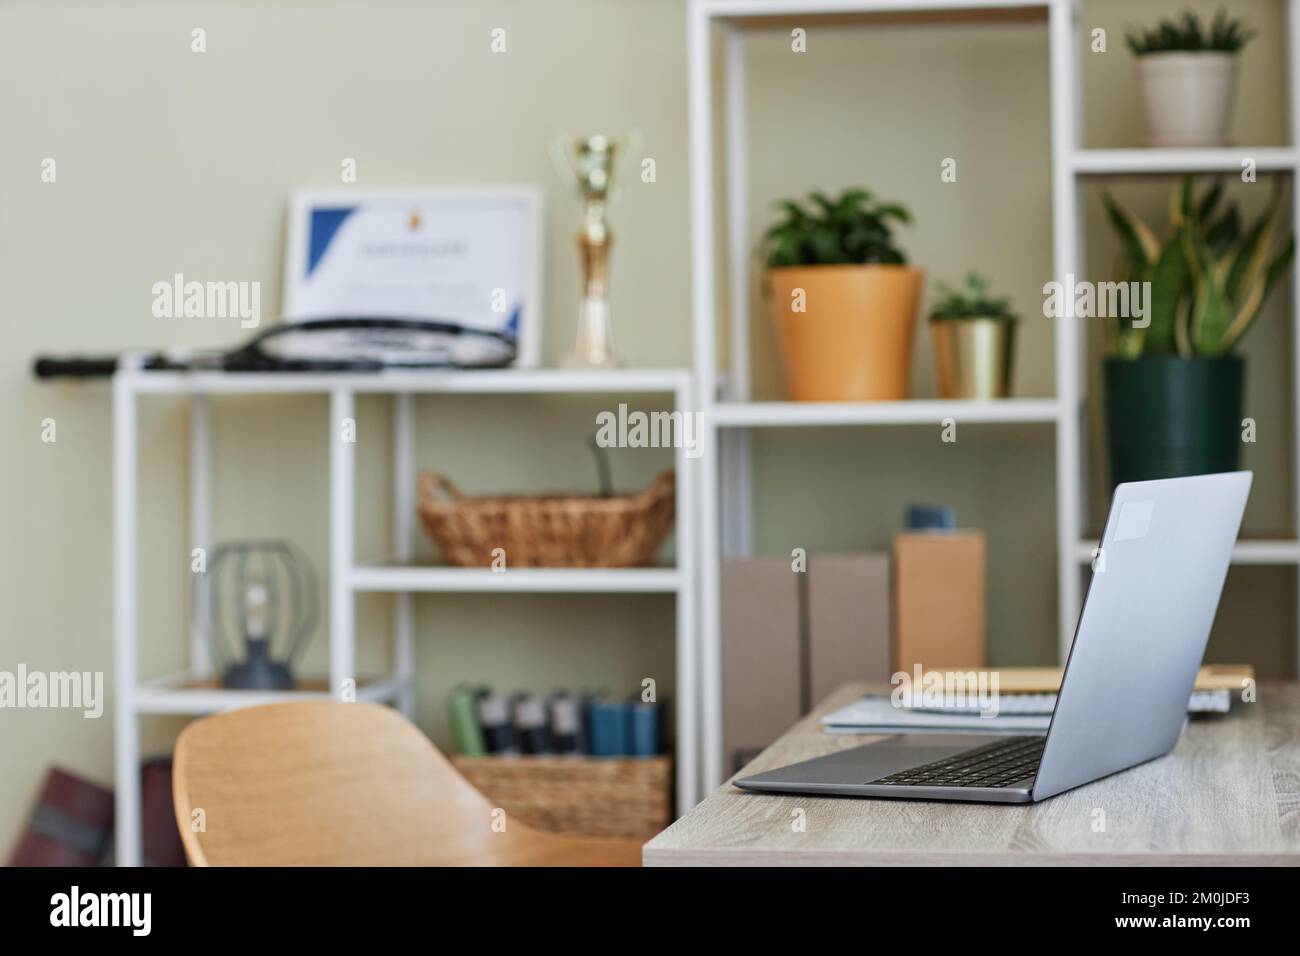 Background image of open laptop at home office workplace, side view Stock Photo